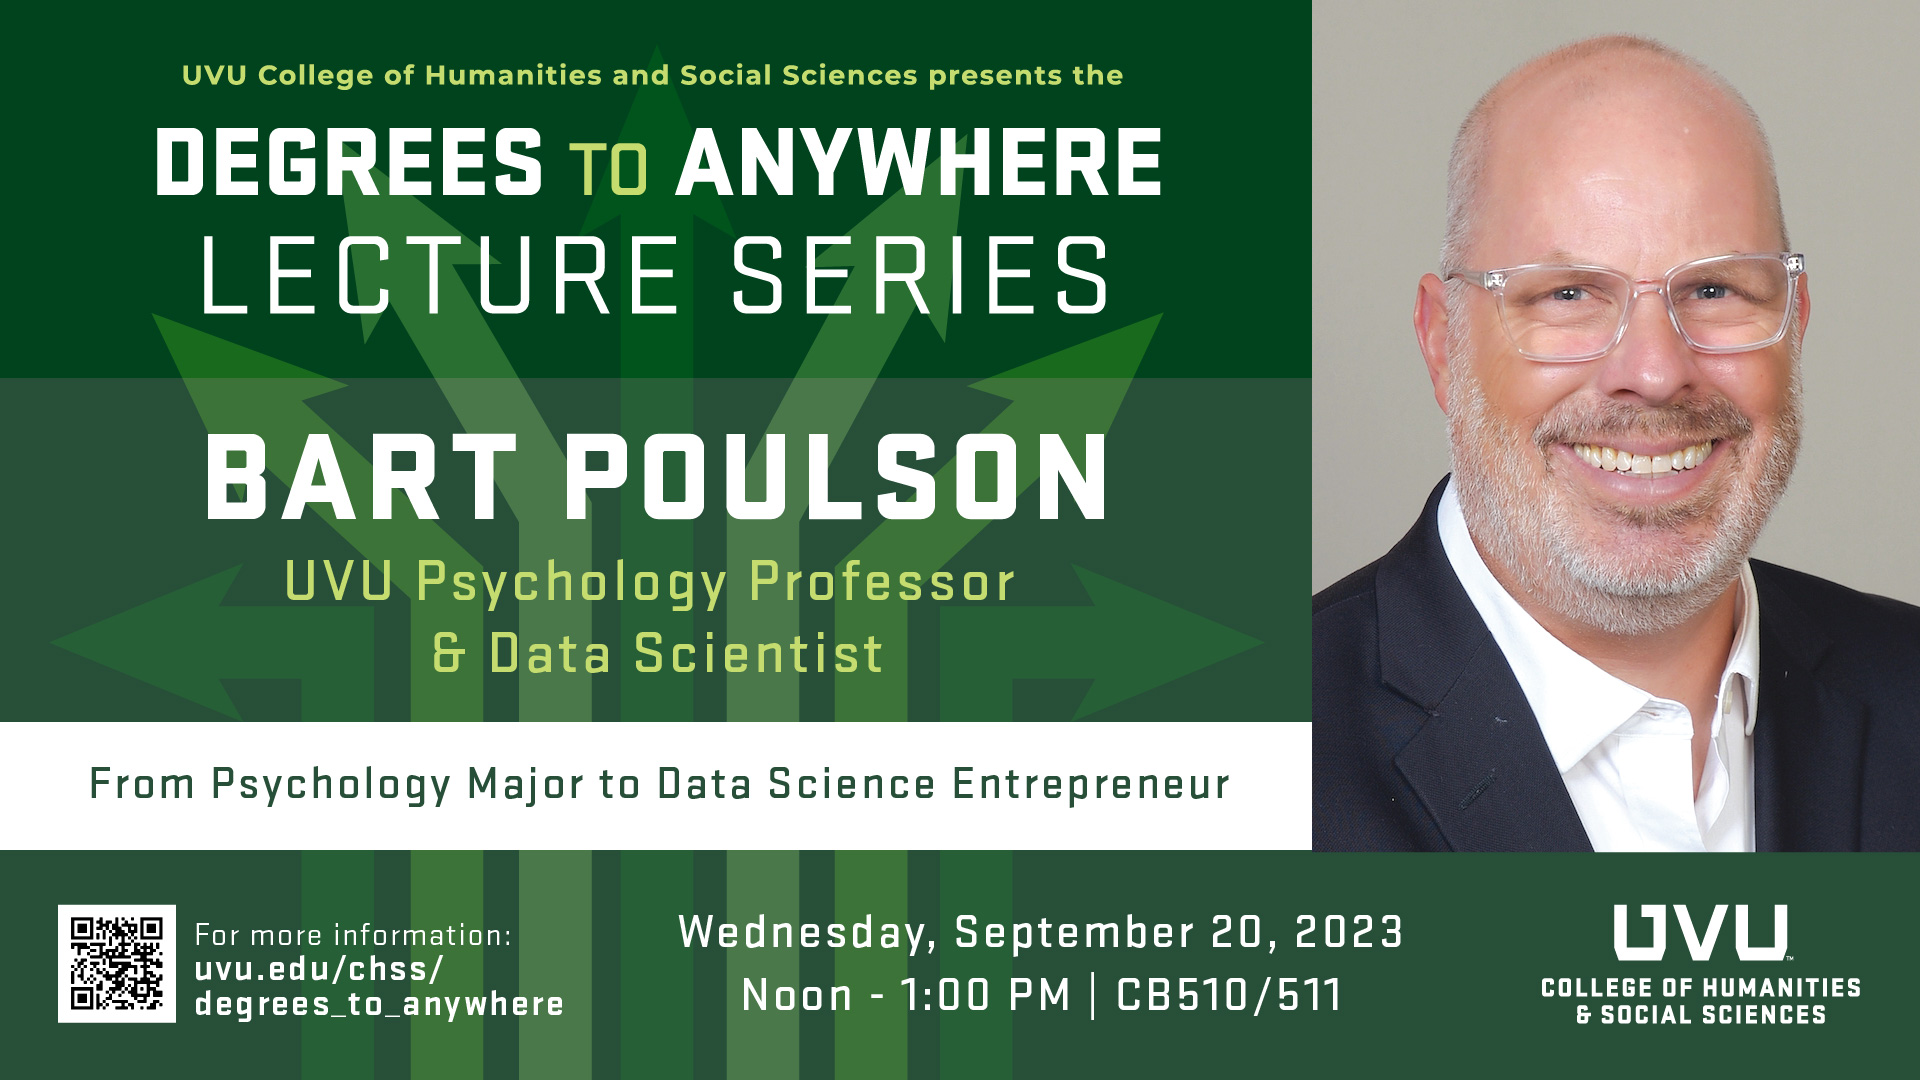 Degrees to Anywhere speaker Bart Poulson, presenting on September 20, 2023 at 12pm-1pm in CB510/511